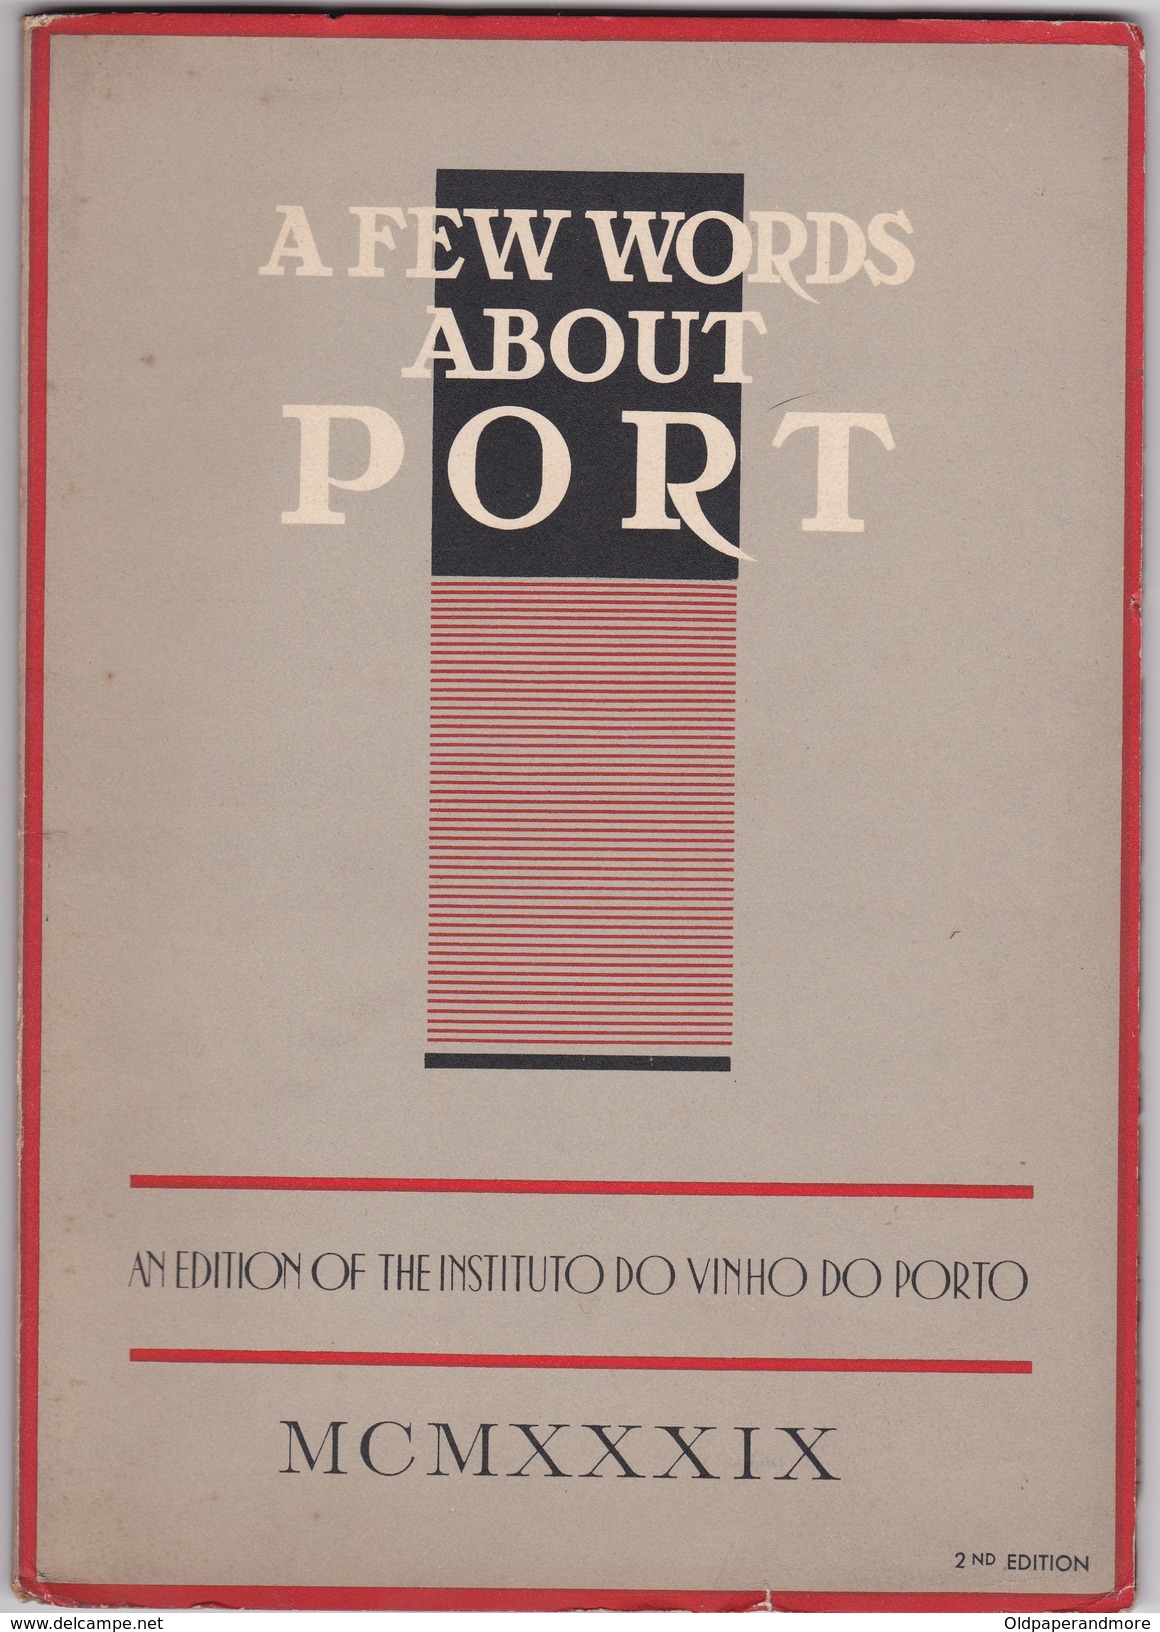 PORTUGAL - A FEW WORDS ABOUT PORT - AN EDITION OF THE INSTITUTO DO VINHO DO PORTO 1939 - WINE - VINO - 2nd EDITION - Europese